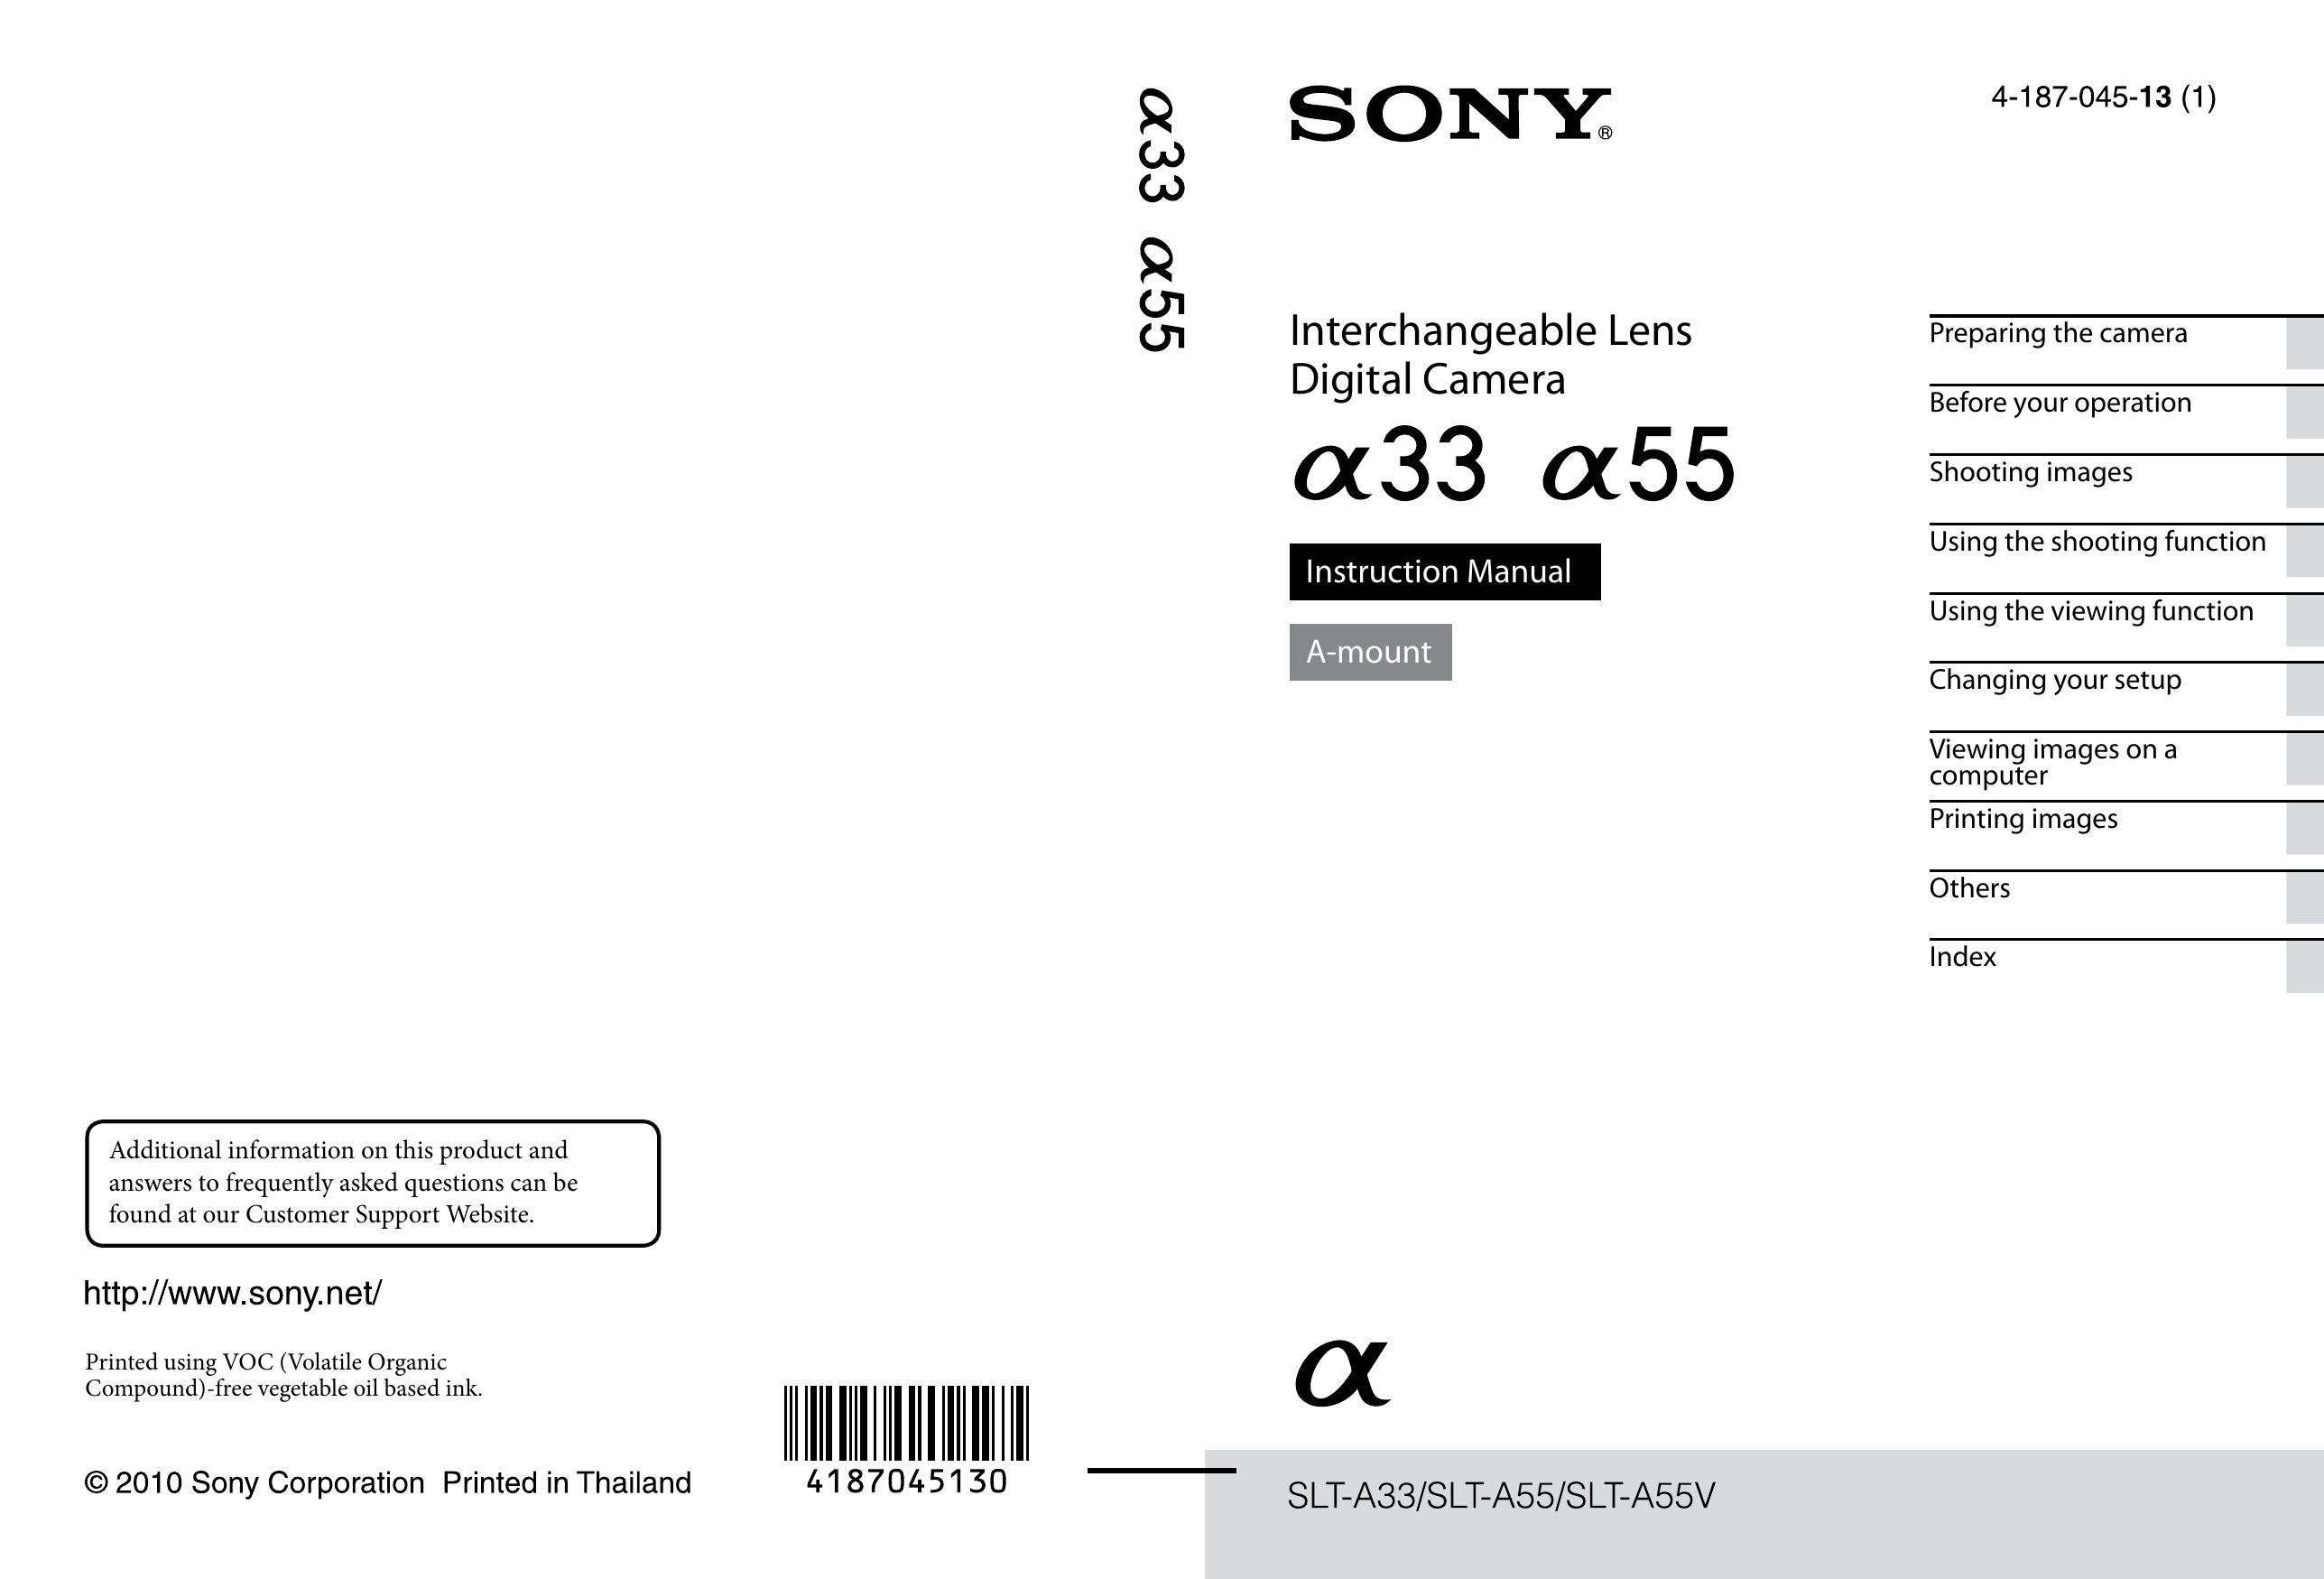 Sony 4-187-045-13(1) Camcorder User Manual